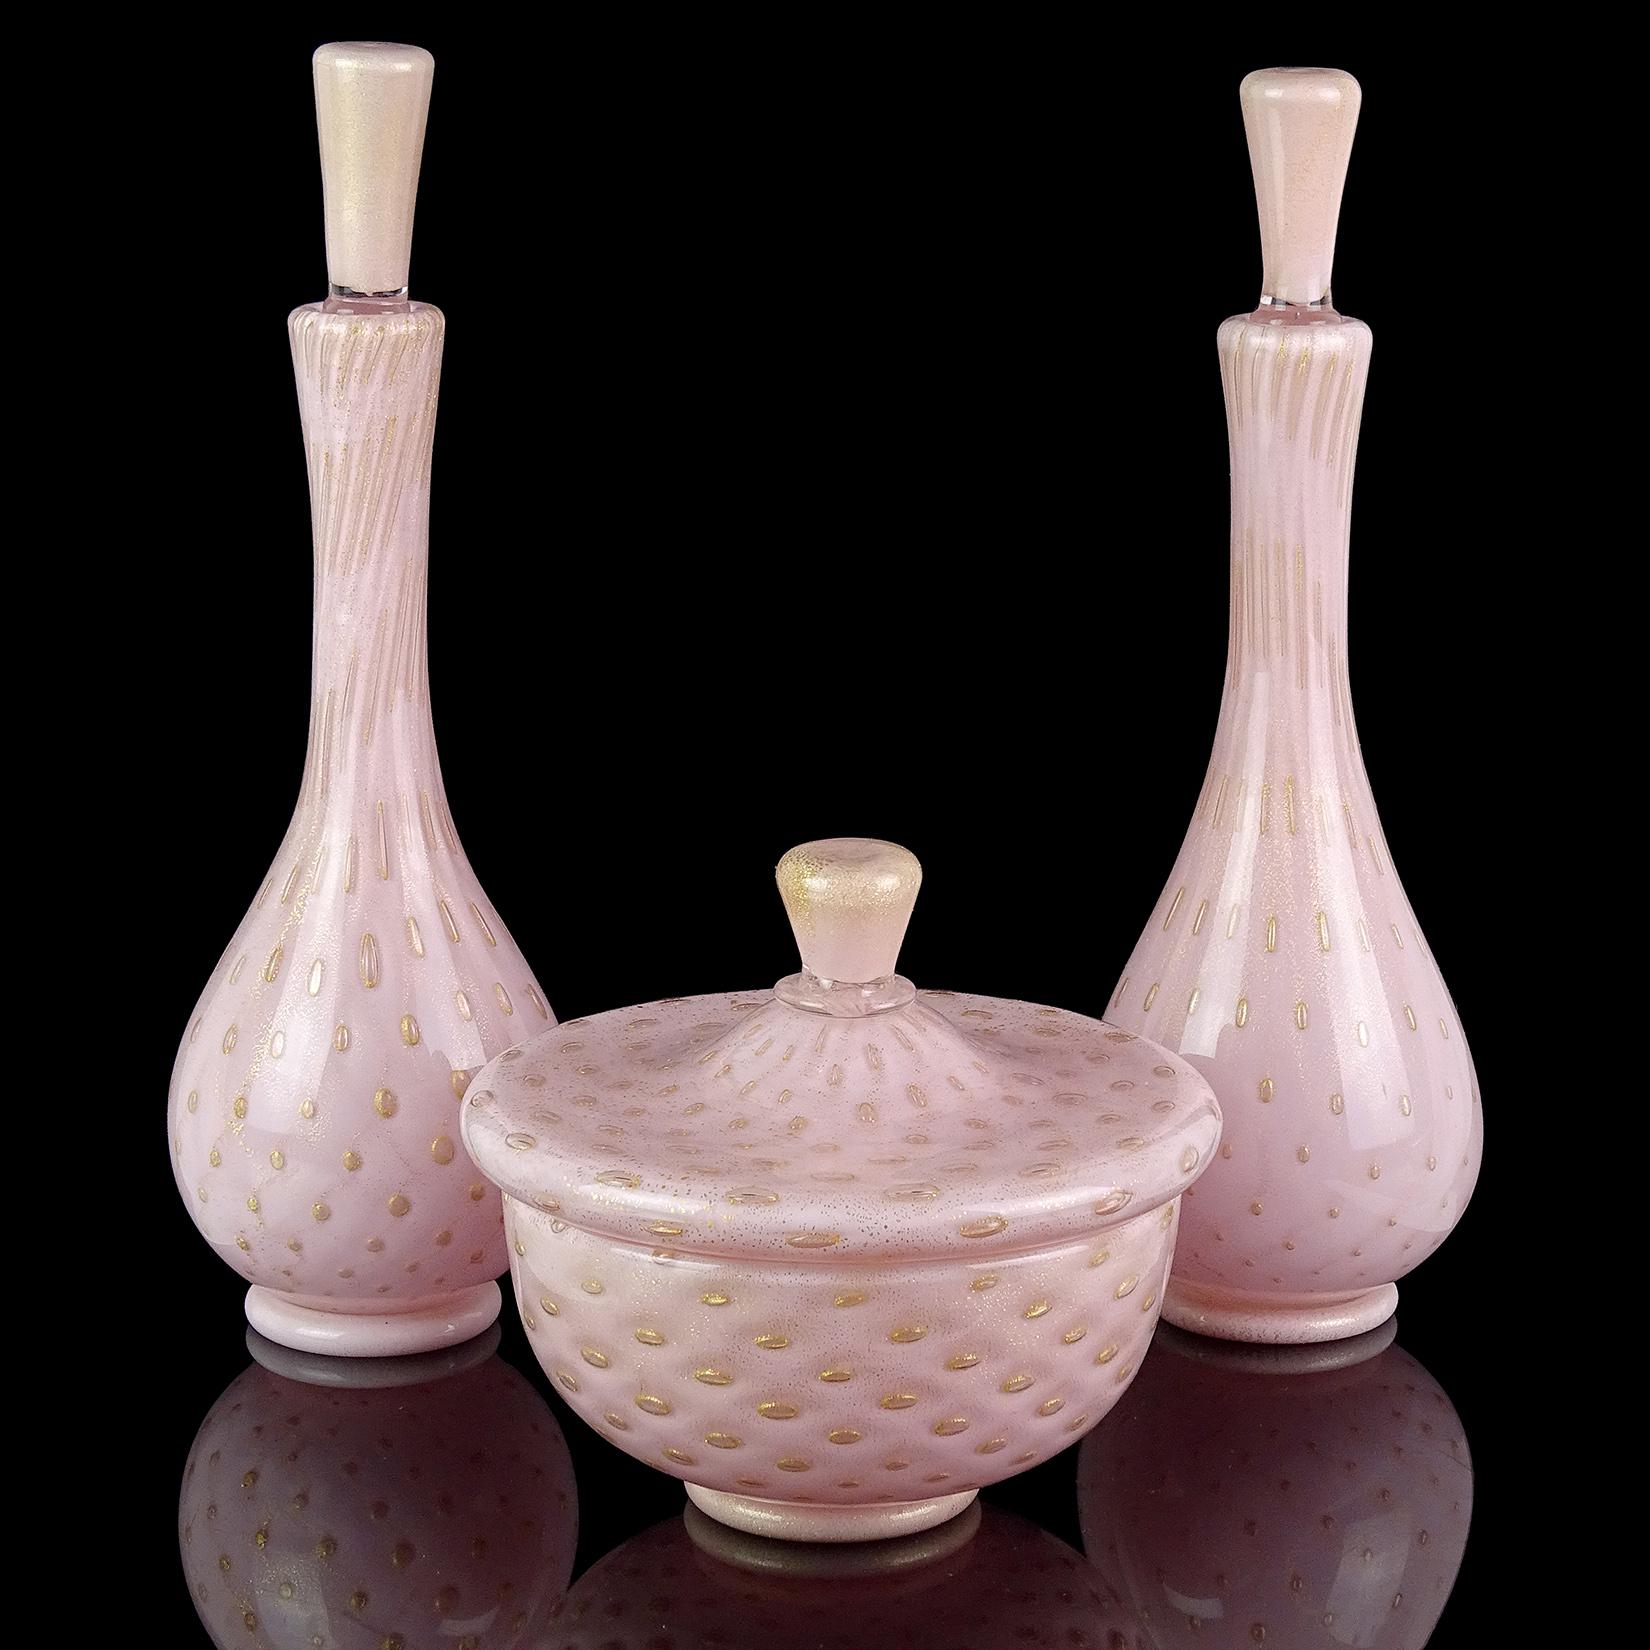 Beautiful vintage Murano hand blown pink, controlled bubbles and gold flecks Italian art glass vanity / dresser powder box with matching bottles. Documented to designer Alfredo Barbini. The gold leaf gathers around each bubble, making them really